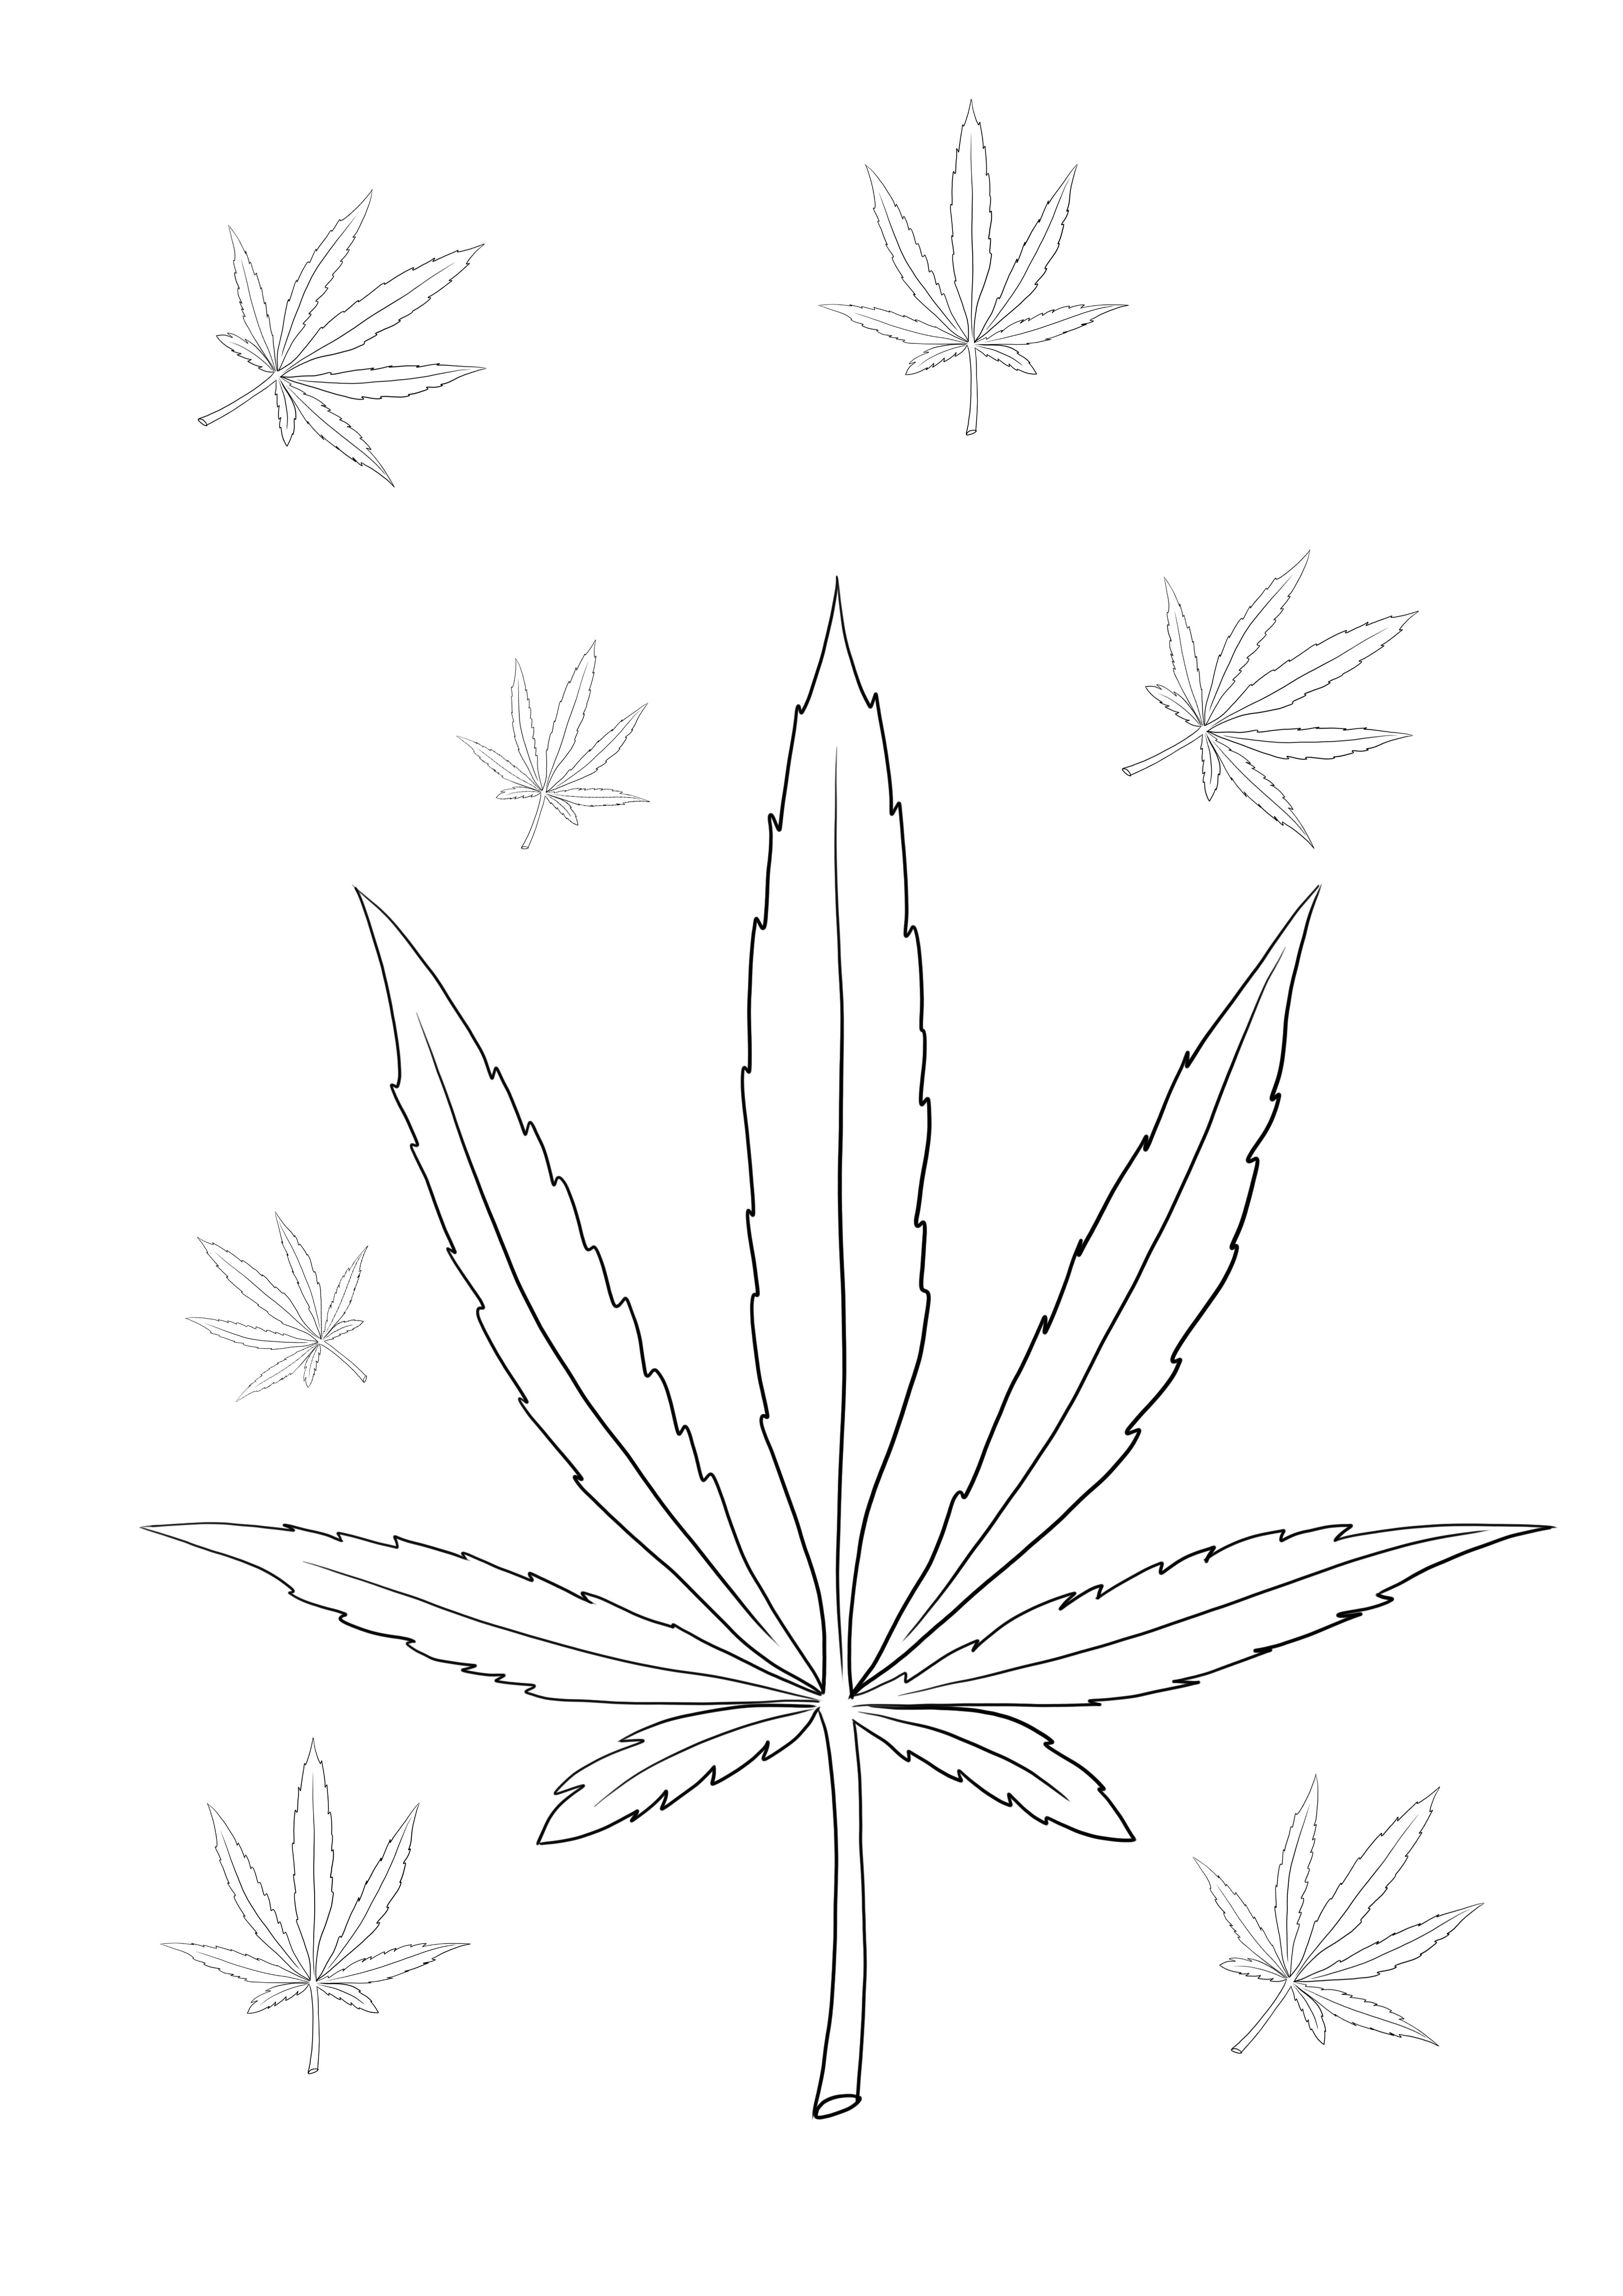 Weed leaf coloring sheet for free printing